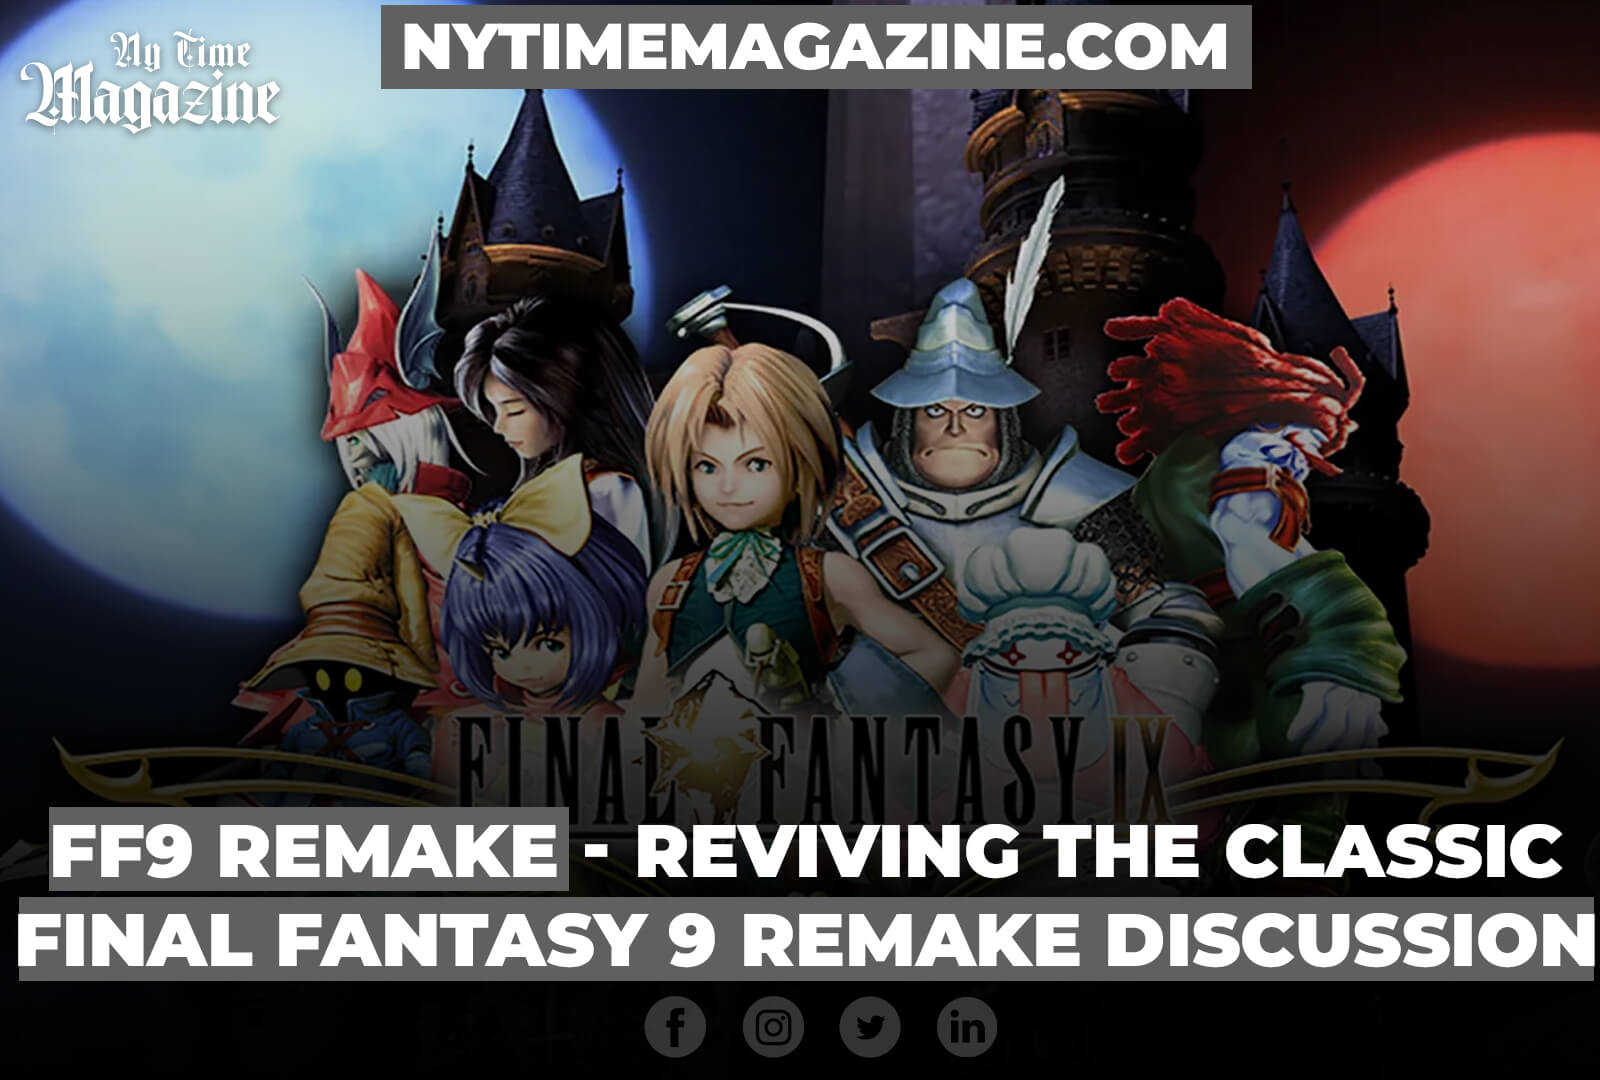 FF9 REMAKE REVIVING THE CLASSIC FINAL FANTASY 9 REMAKE DISCUSSION